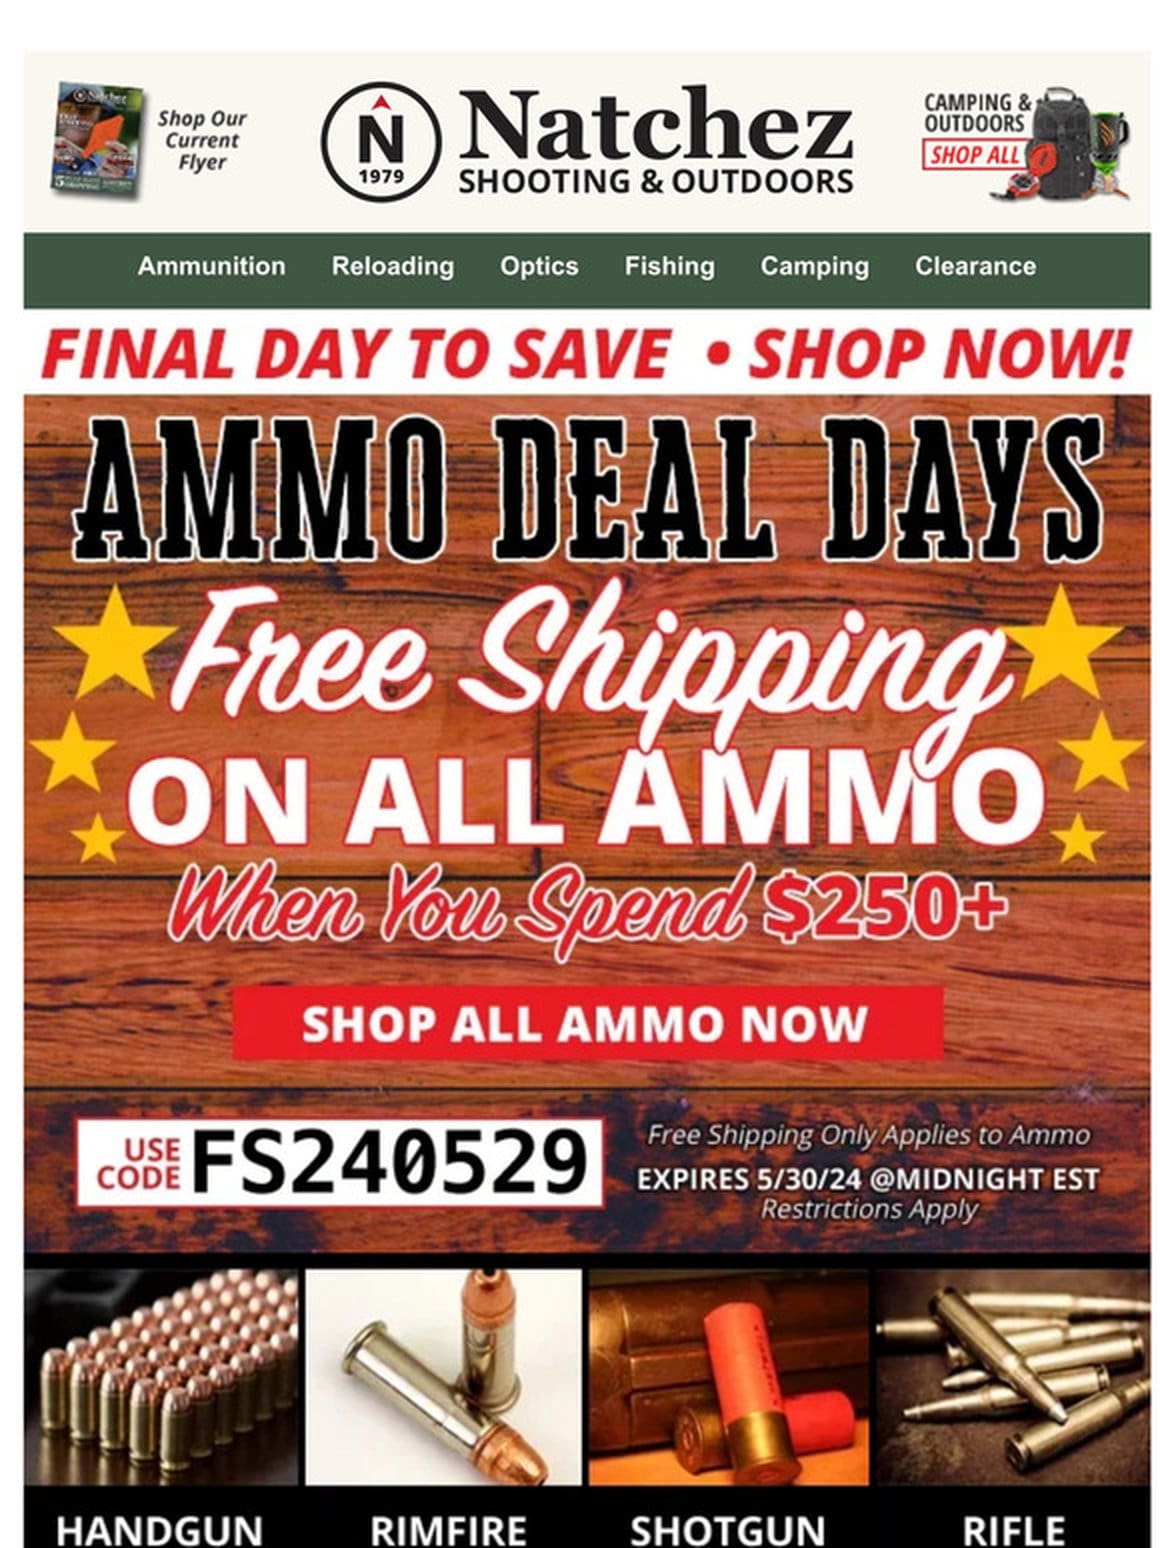 Final Day for Free Shipping on All Ammo